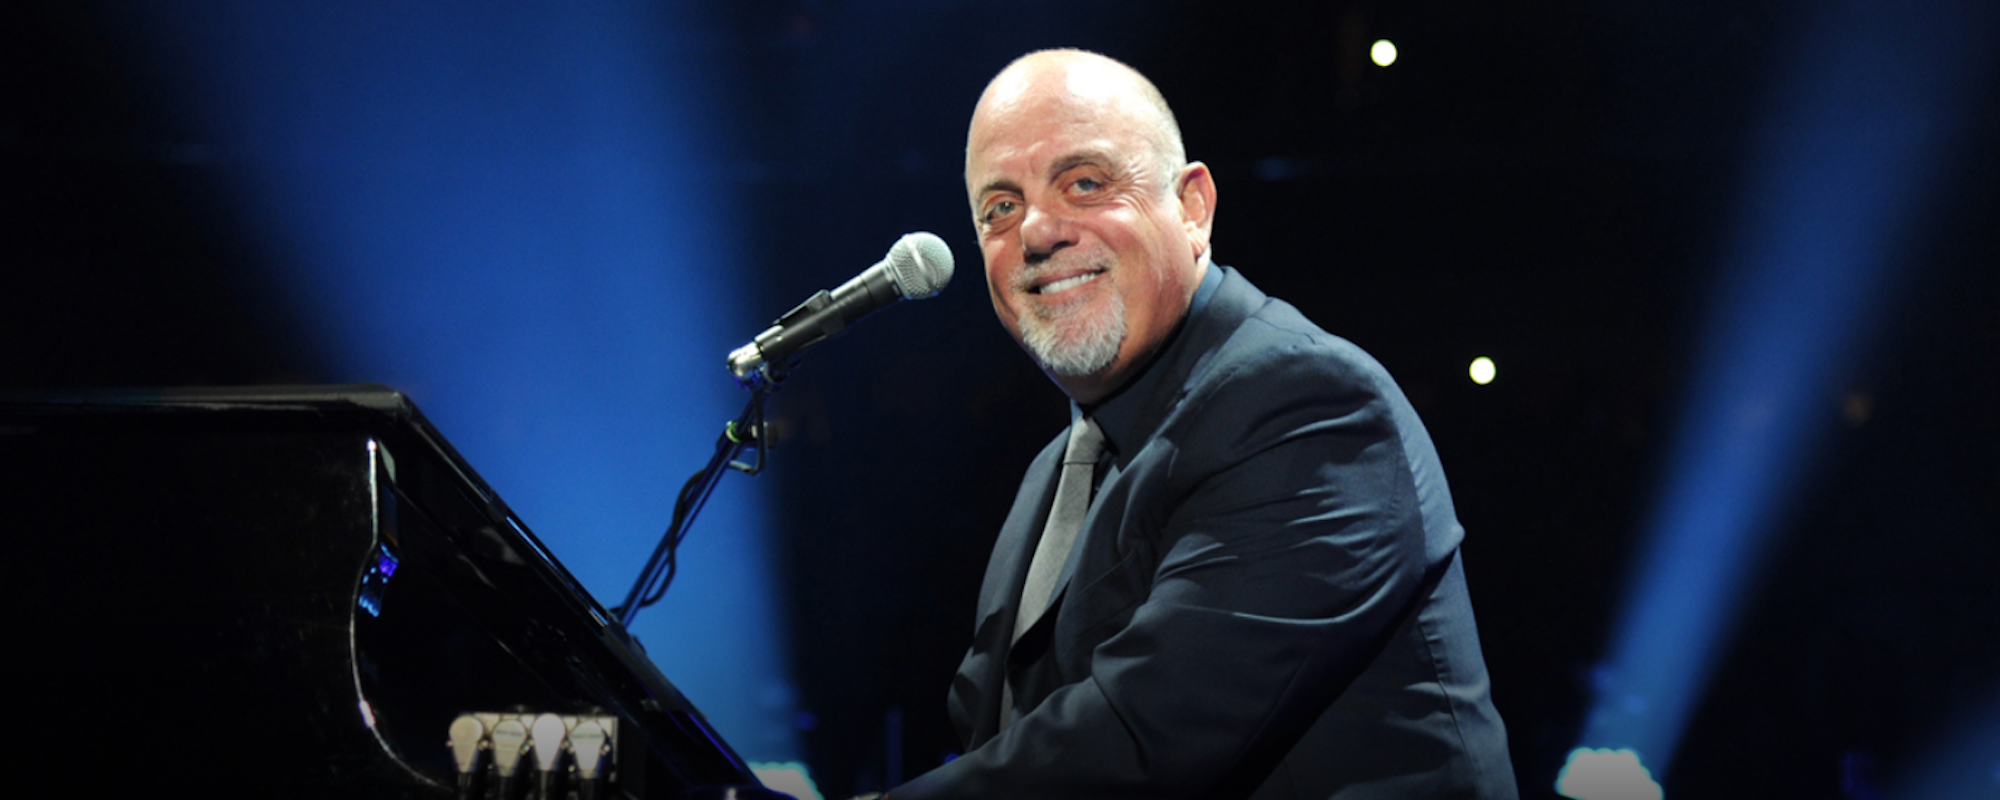 Billy Joel and Sting to Play First Co-Headlining Concert Next Year in Tampa, Florida